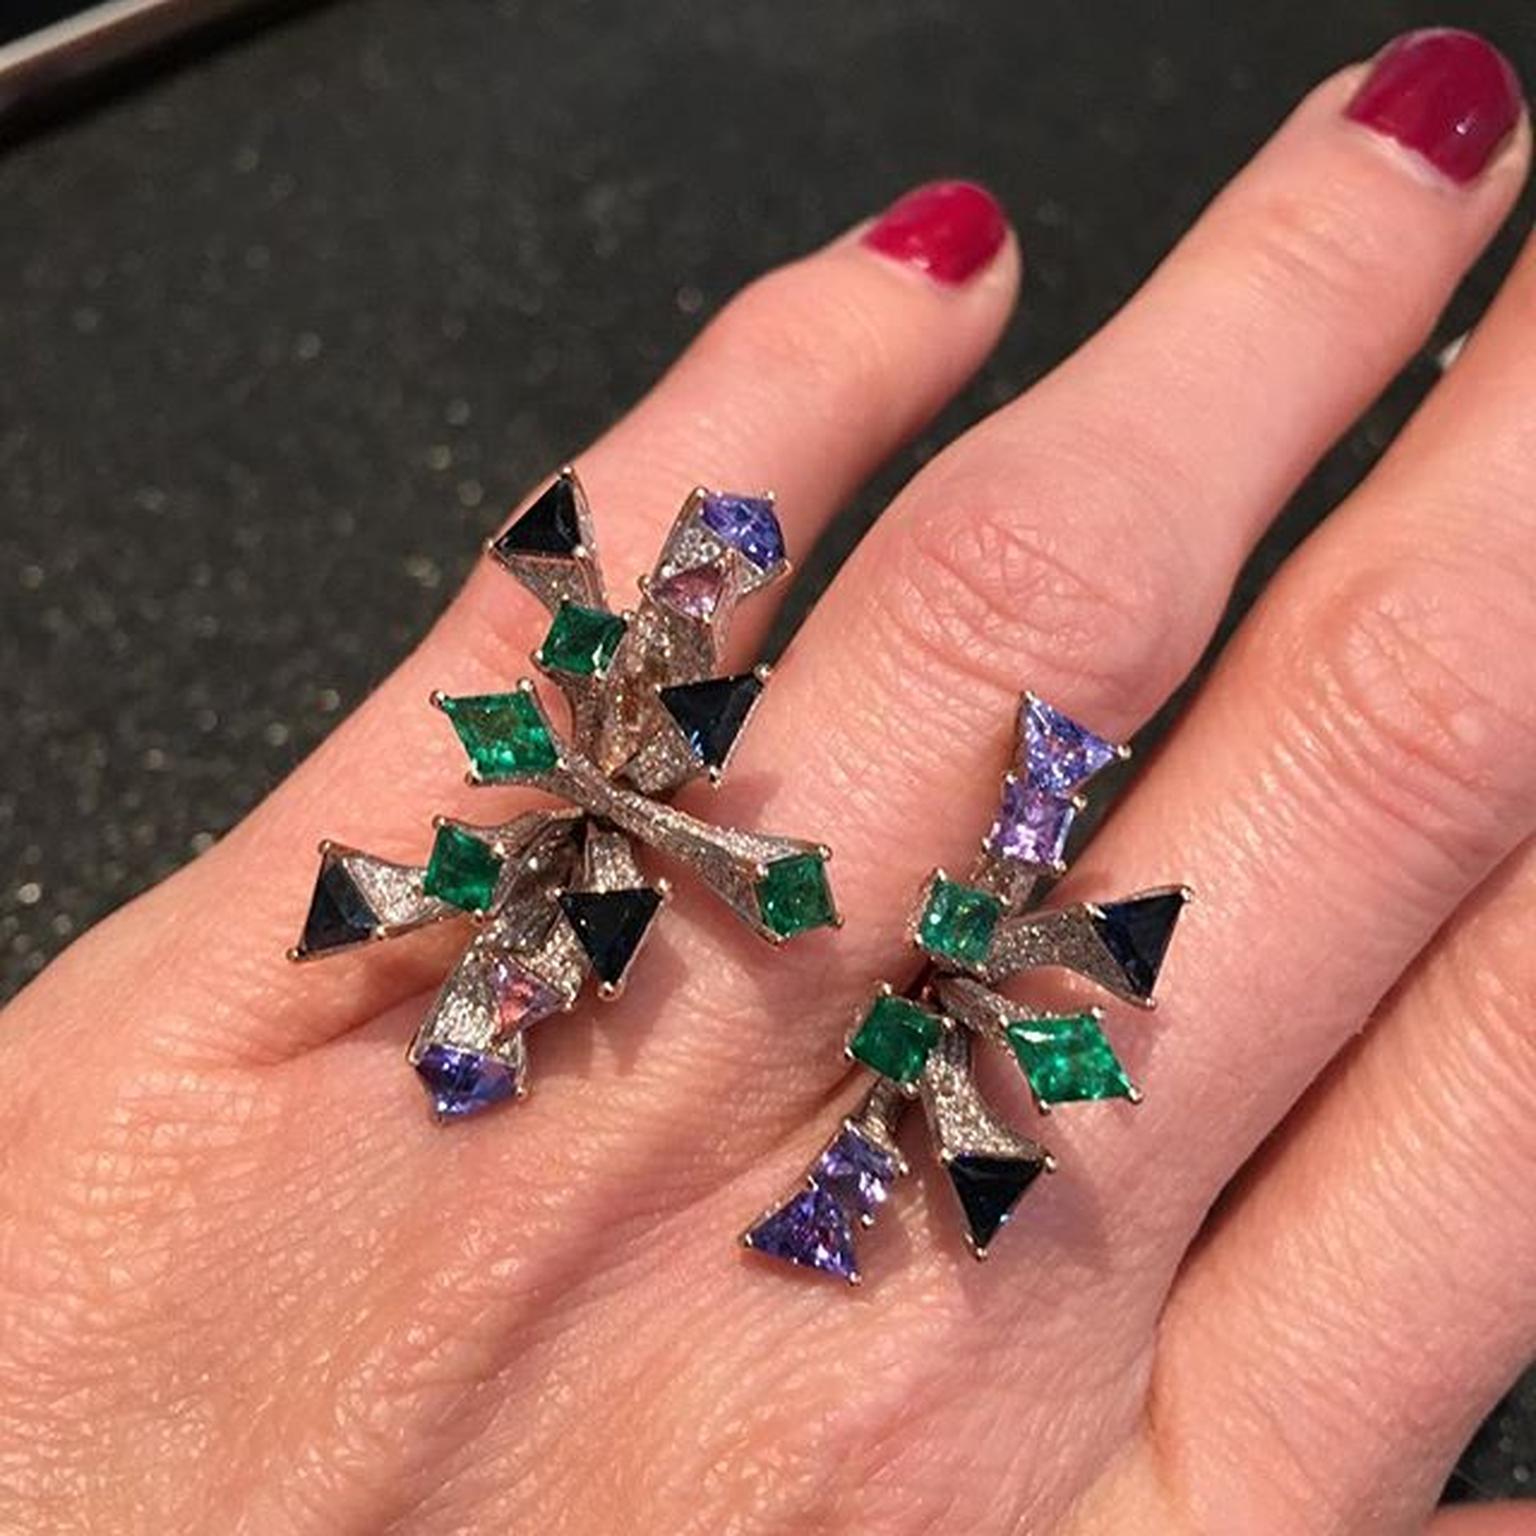 Jewels that stopped you in your tracks on Instagram in June